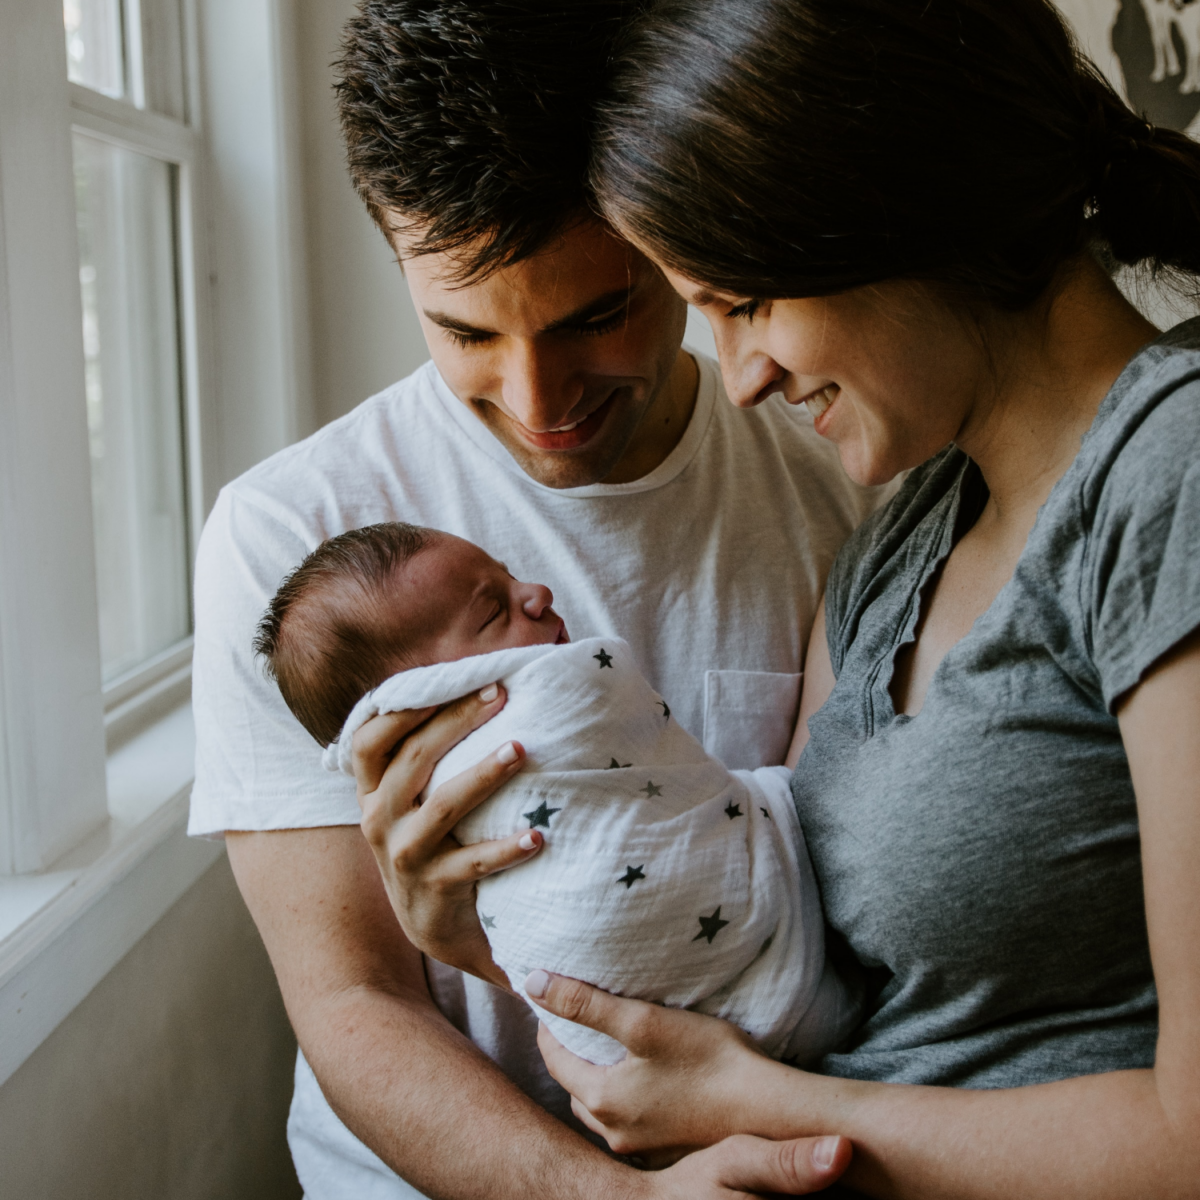 Bringing Comfort to New Parents: Essential Gifts and Meal Train Ideas